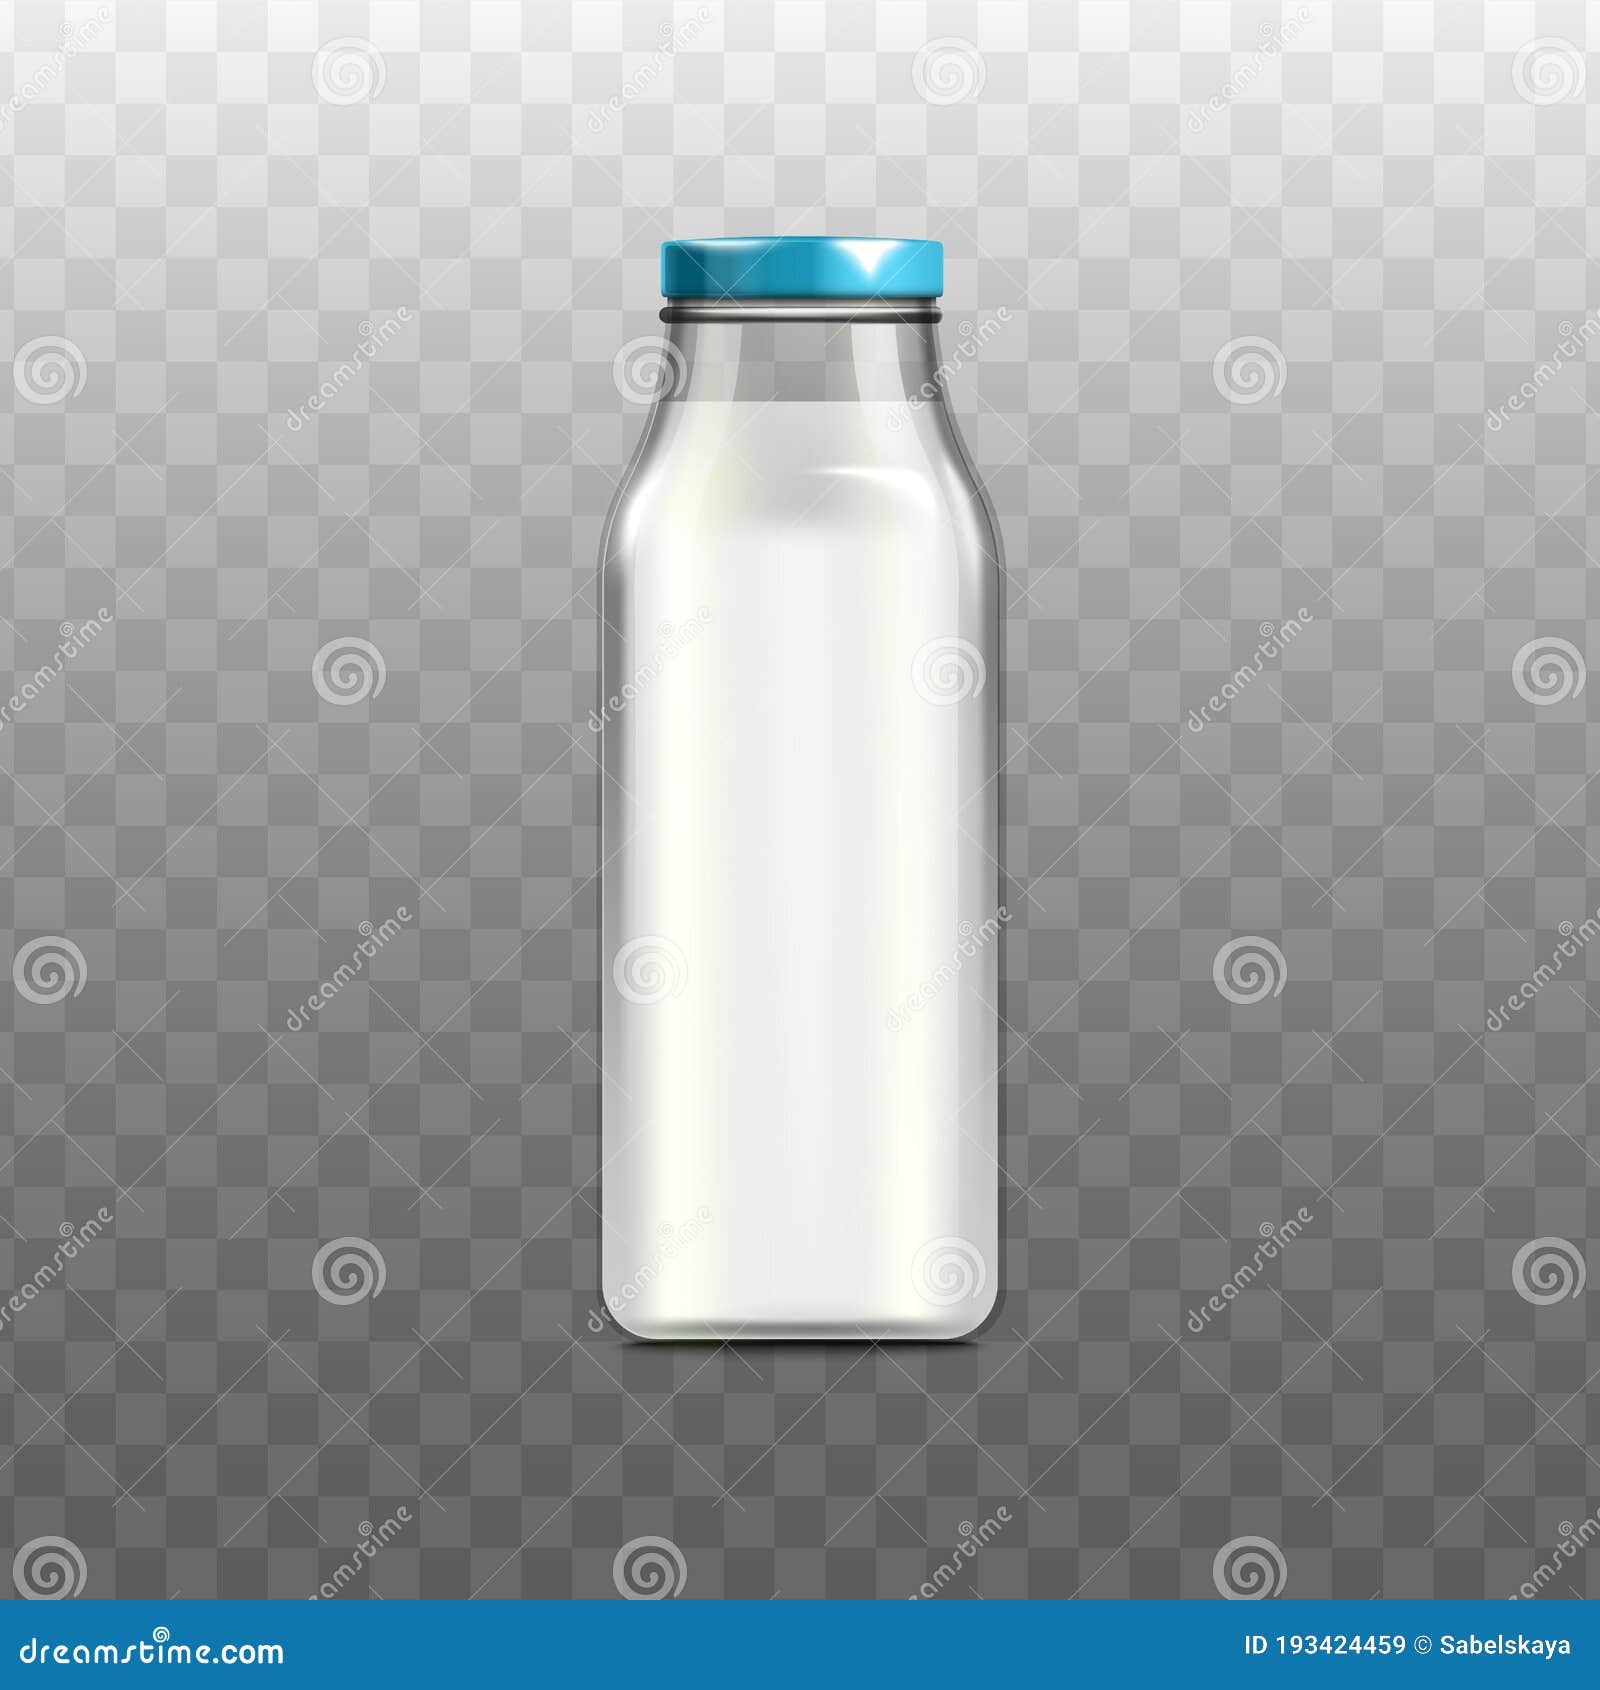 Download Full Milk Bottle Mockup Realistic Glass Drink Container Stock Vector Illustration Of Liquid Clear 193424459